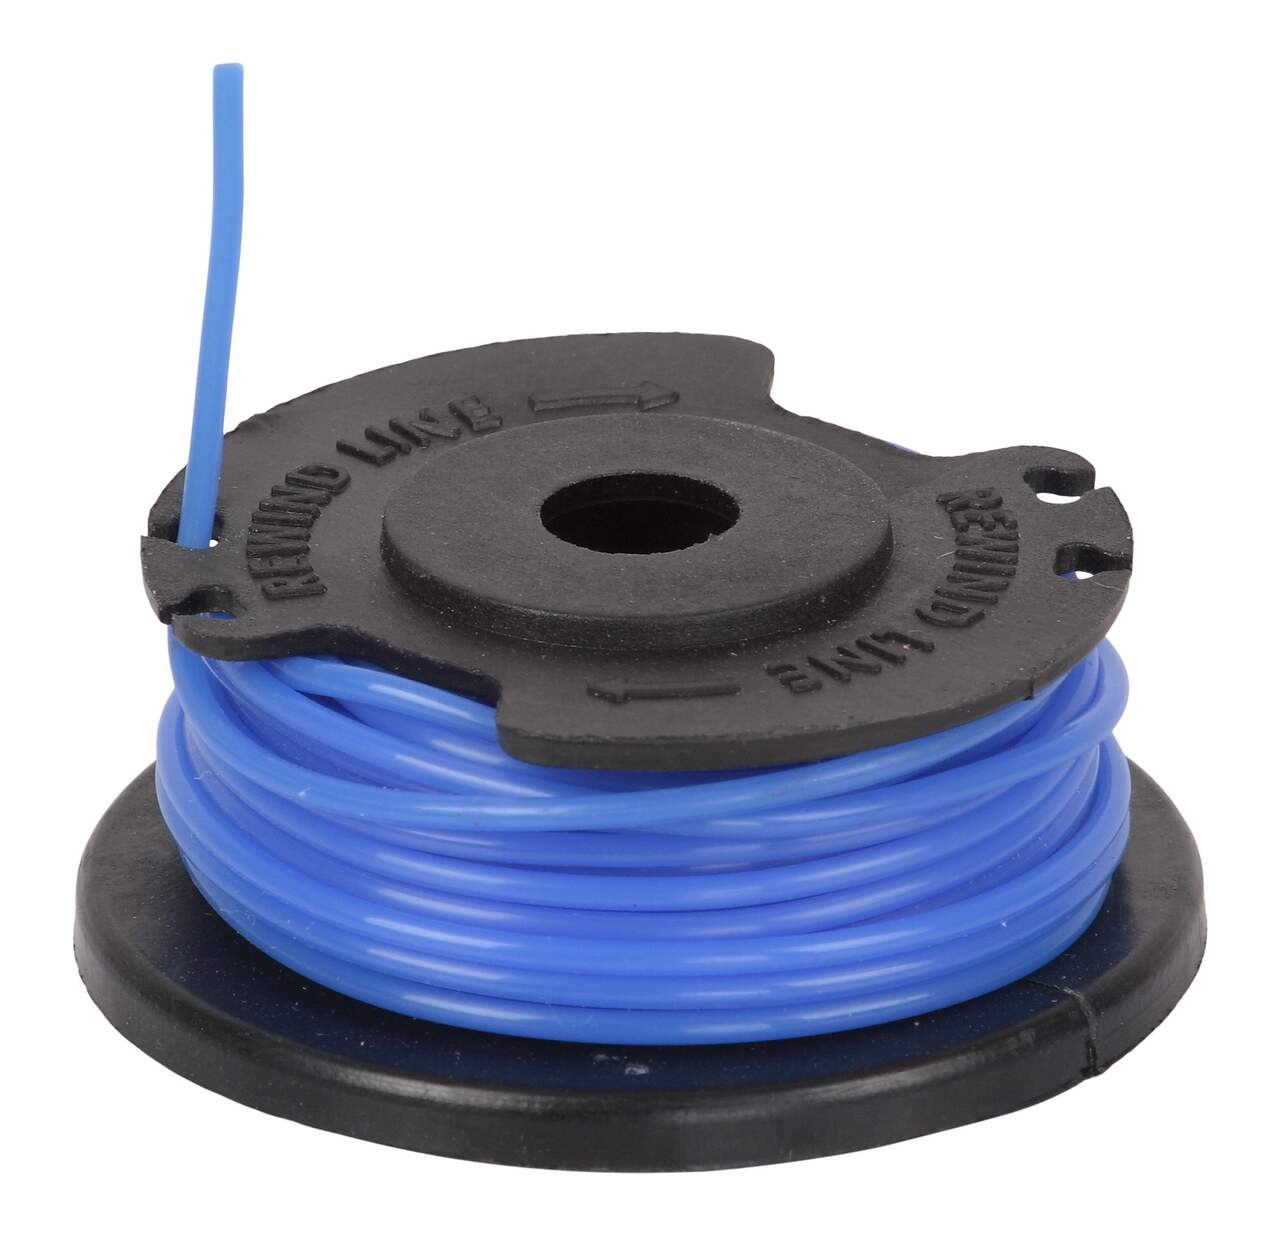 Yardworks Single Line Replacement String Trimmer Spool, 0.065-in